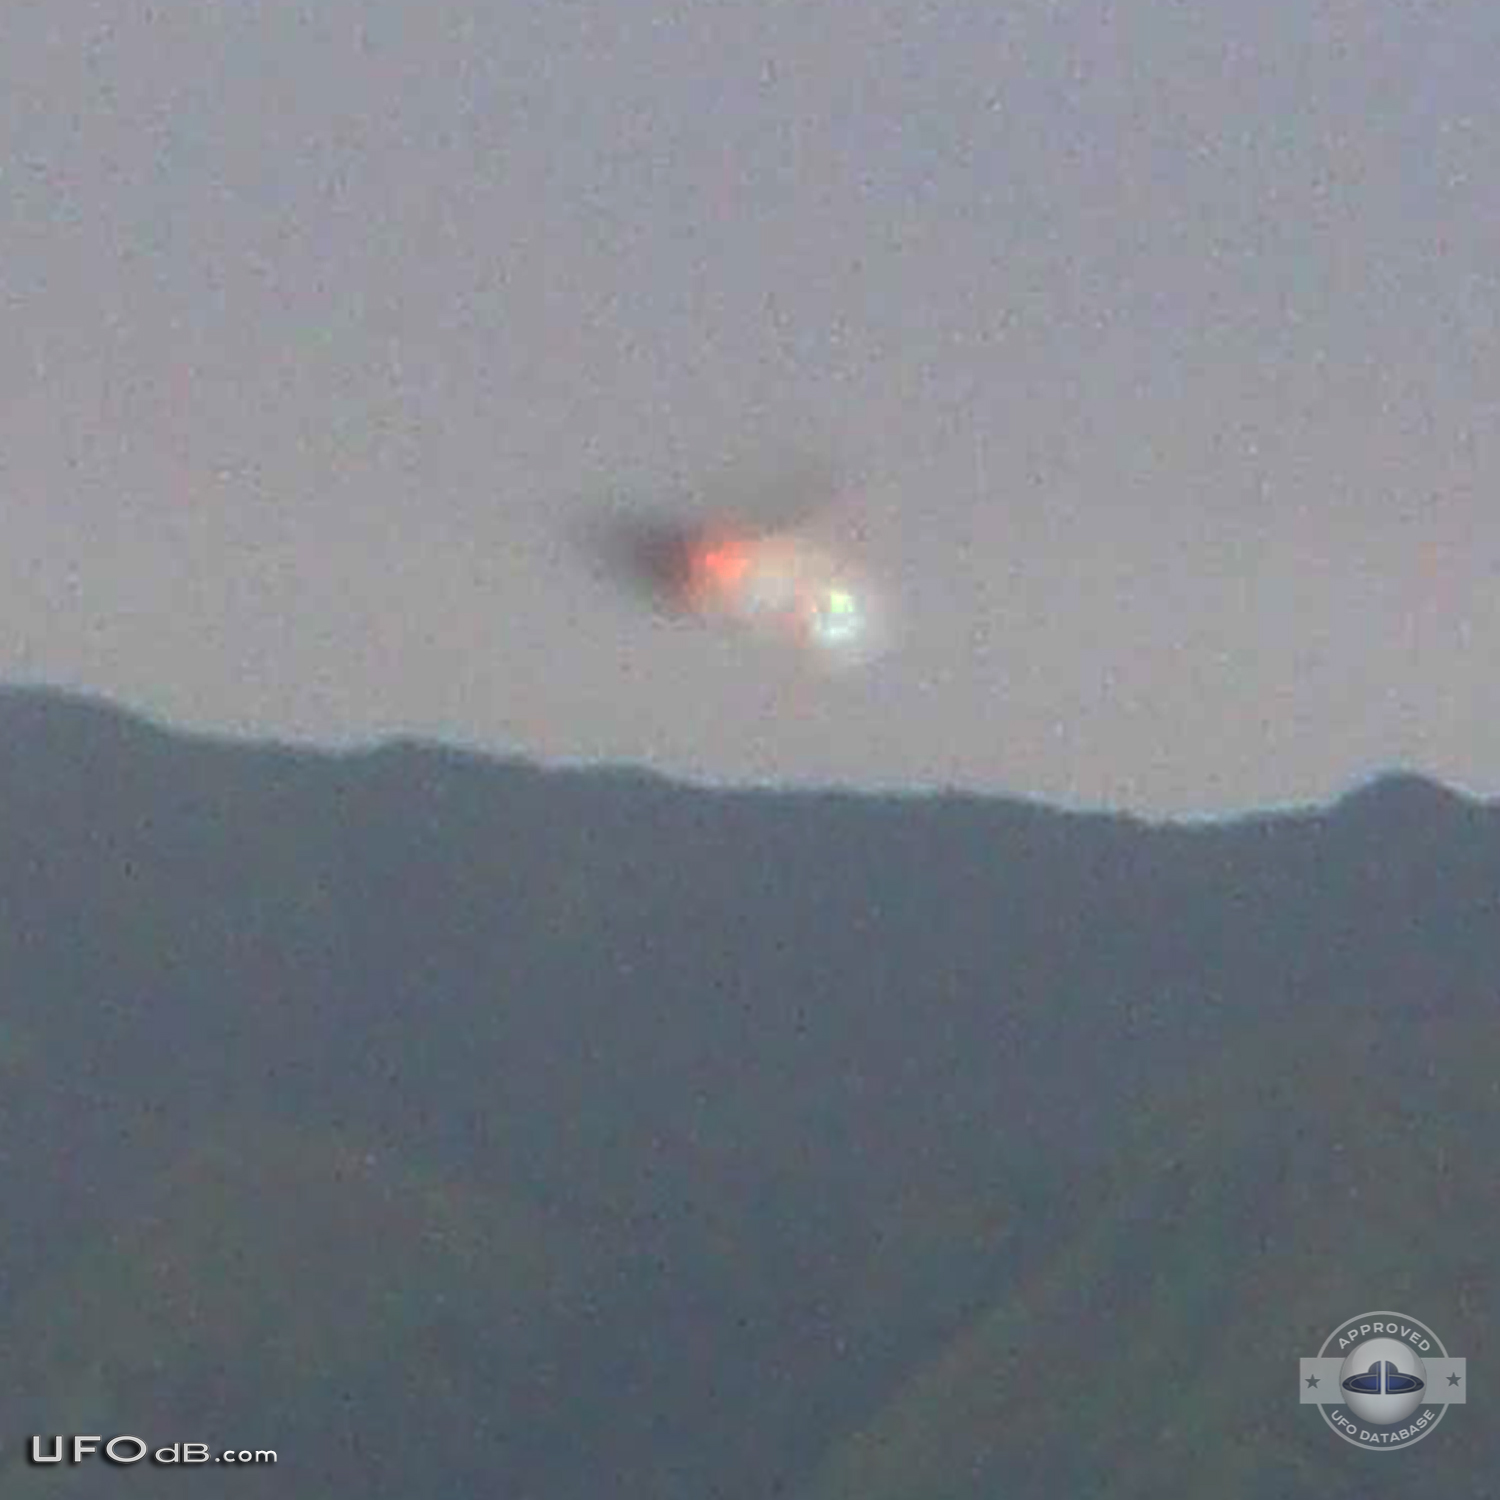 Two ufo pictures taken in the high mountains - Puerto Rico - July 2011 UFO Picture #376-6